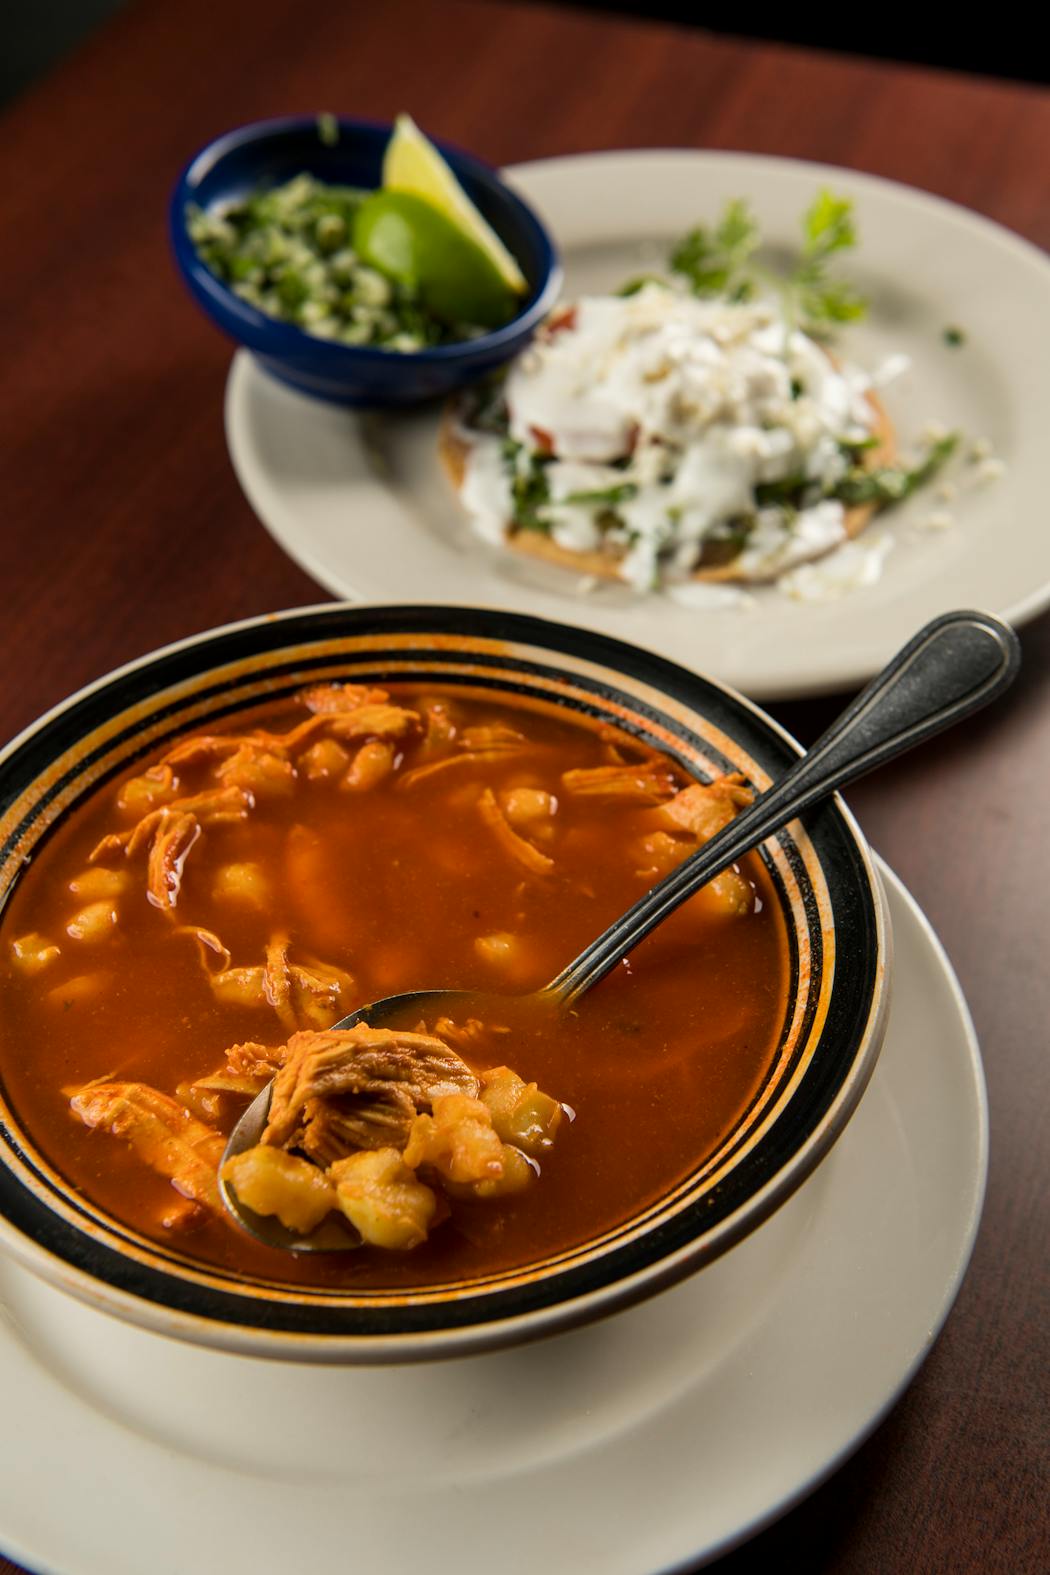 The Pozole de Pollo at Salsa a la Salsa comes with a variety of toppings.